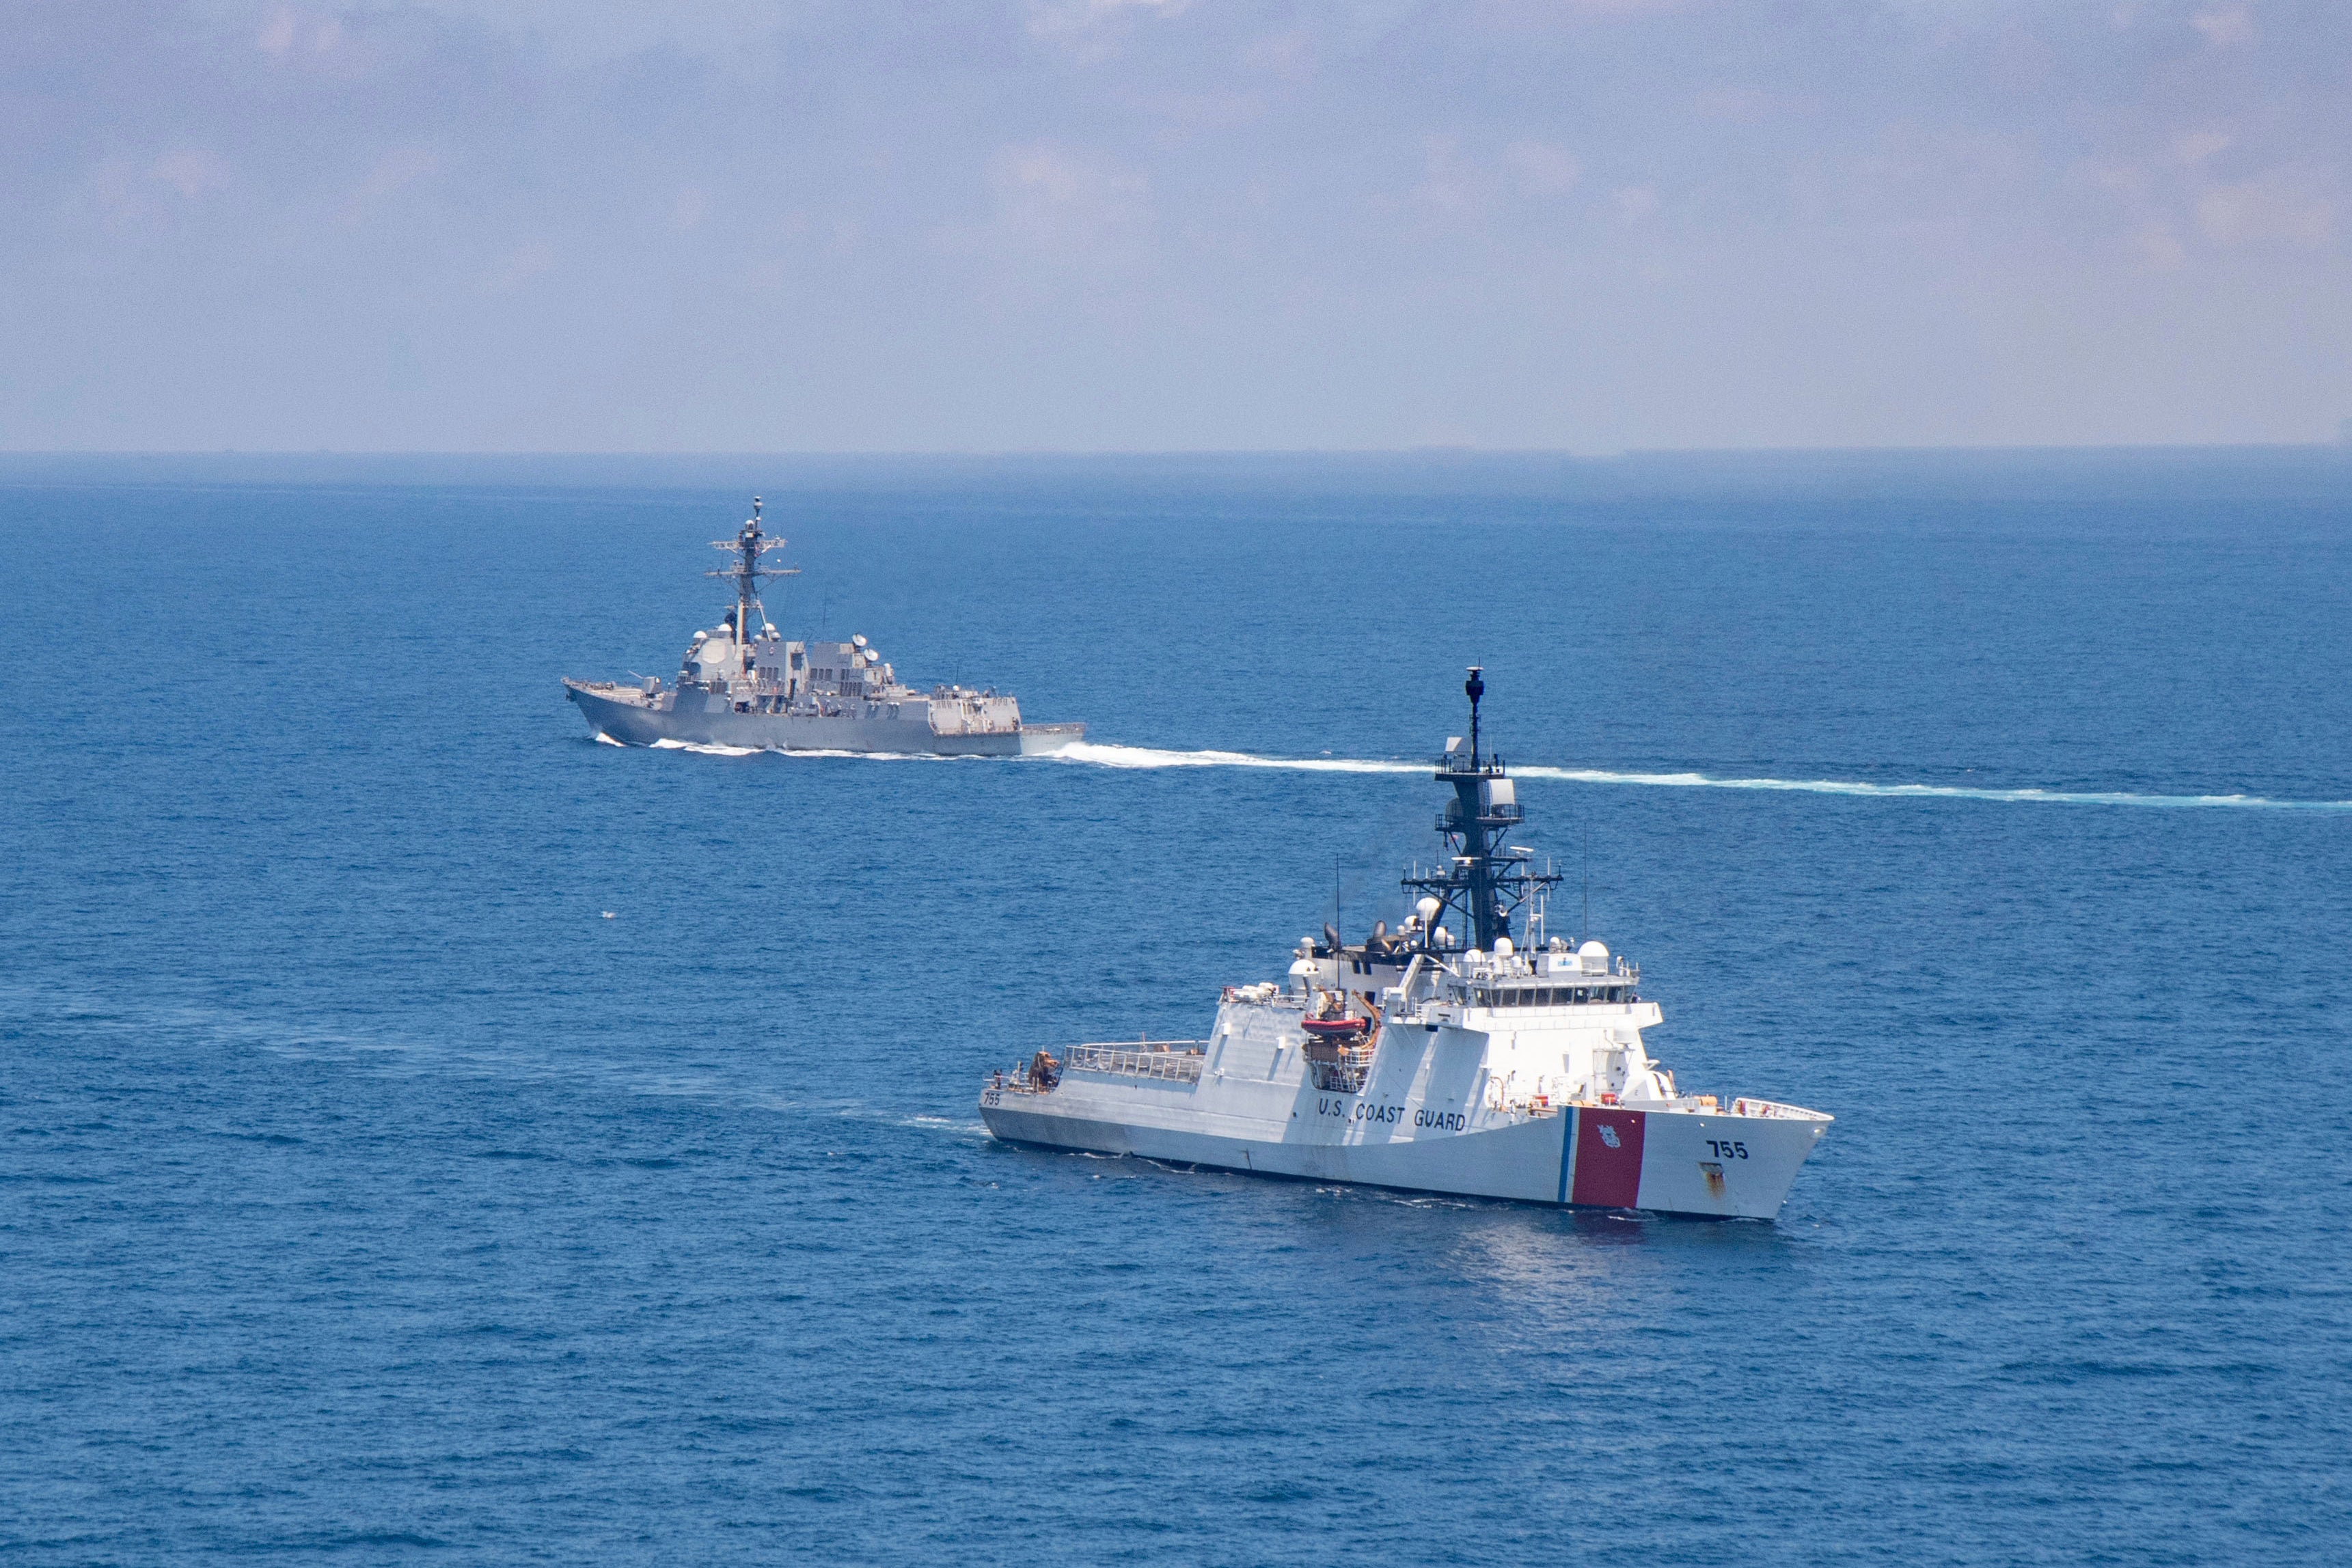 A US Coast Guard vessel in the Taiwan Strait, August 2021